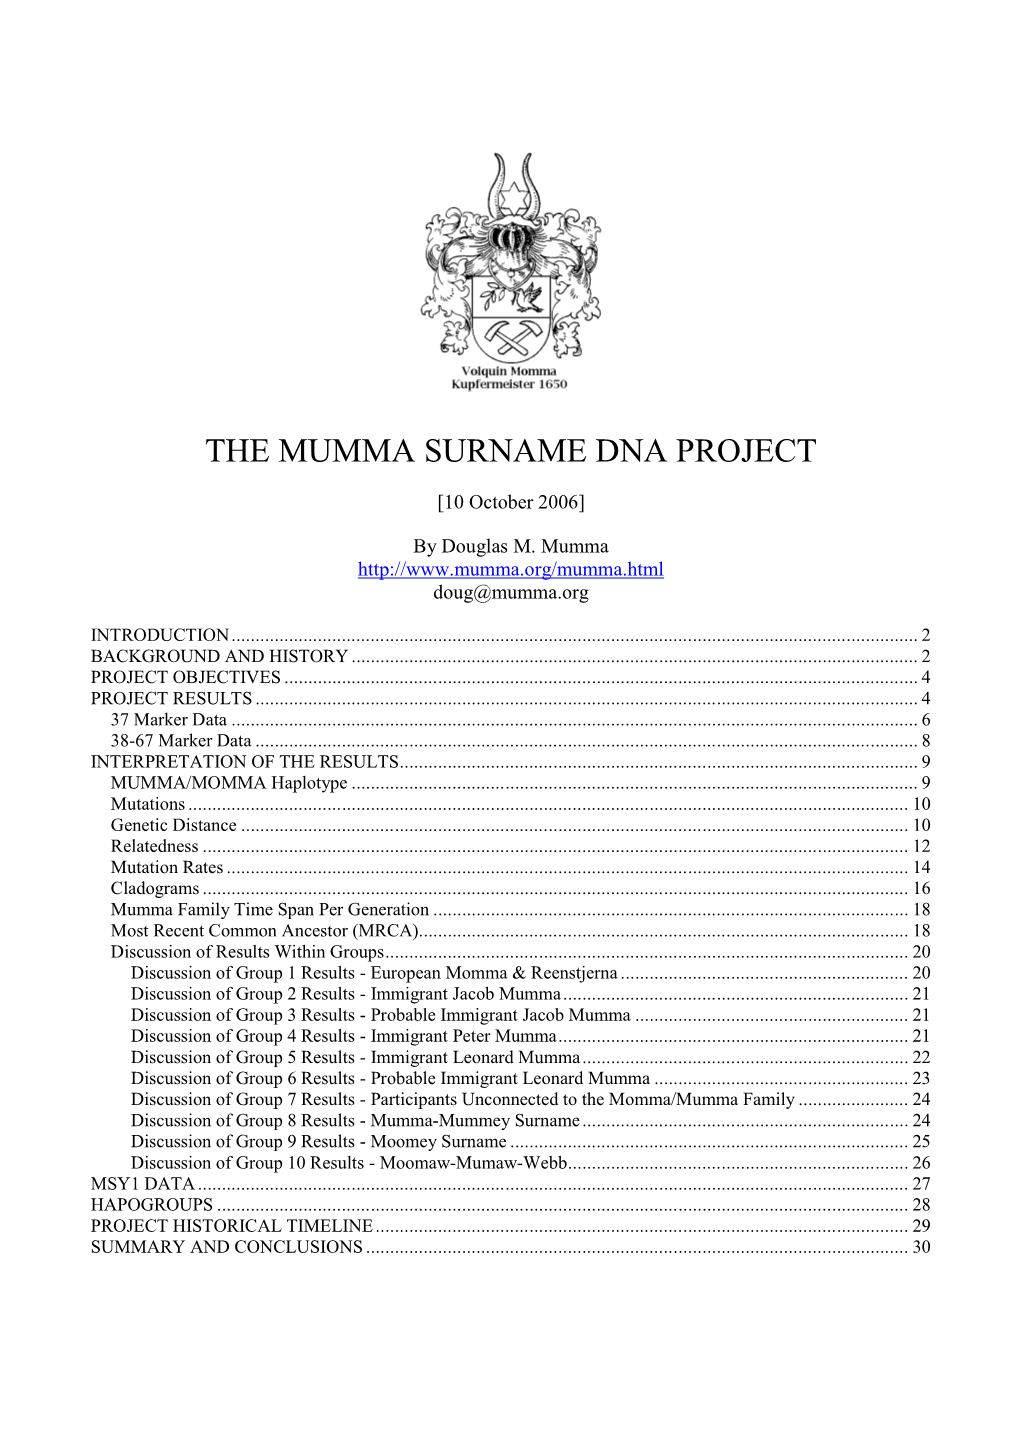 The Mumma Surname Dna Project